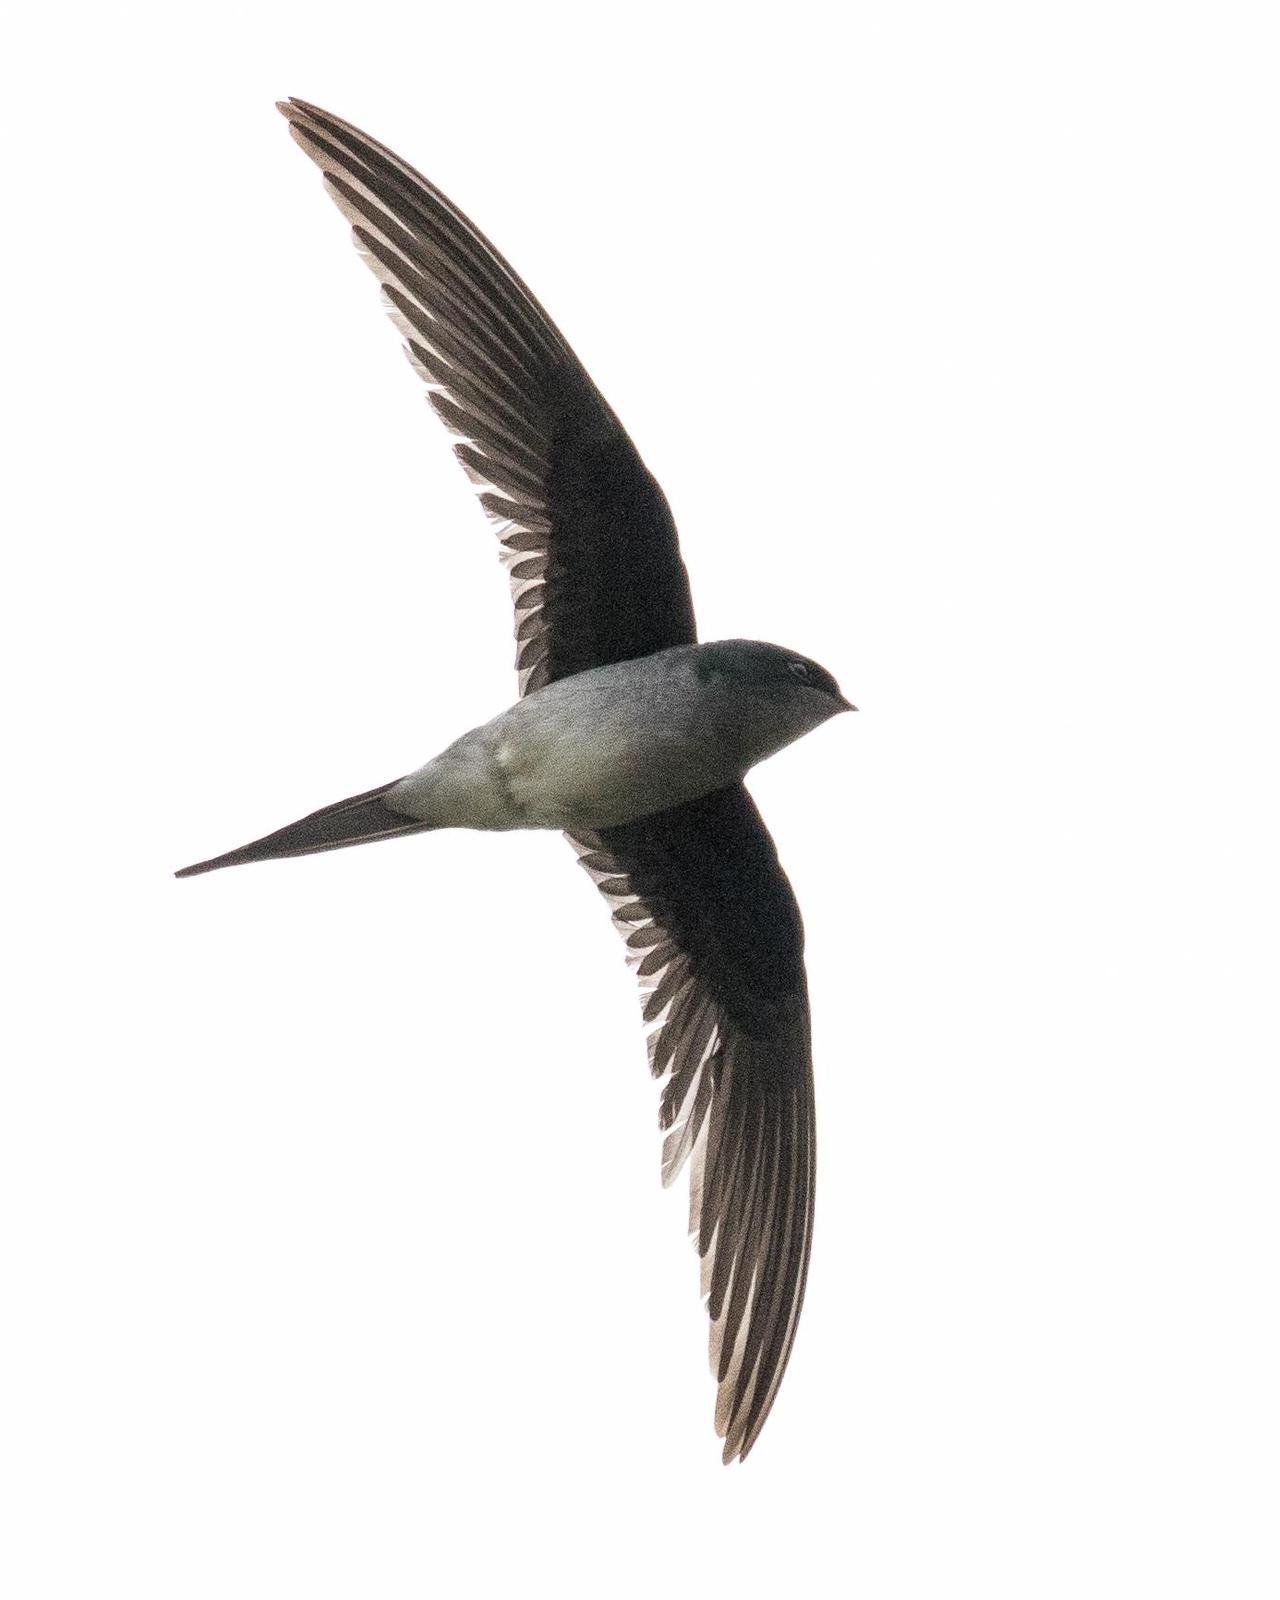 Gray-rumped Treeswift Photo by Robert Lewis